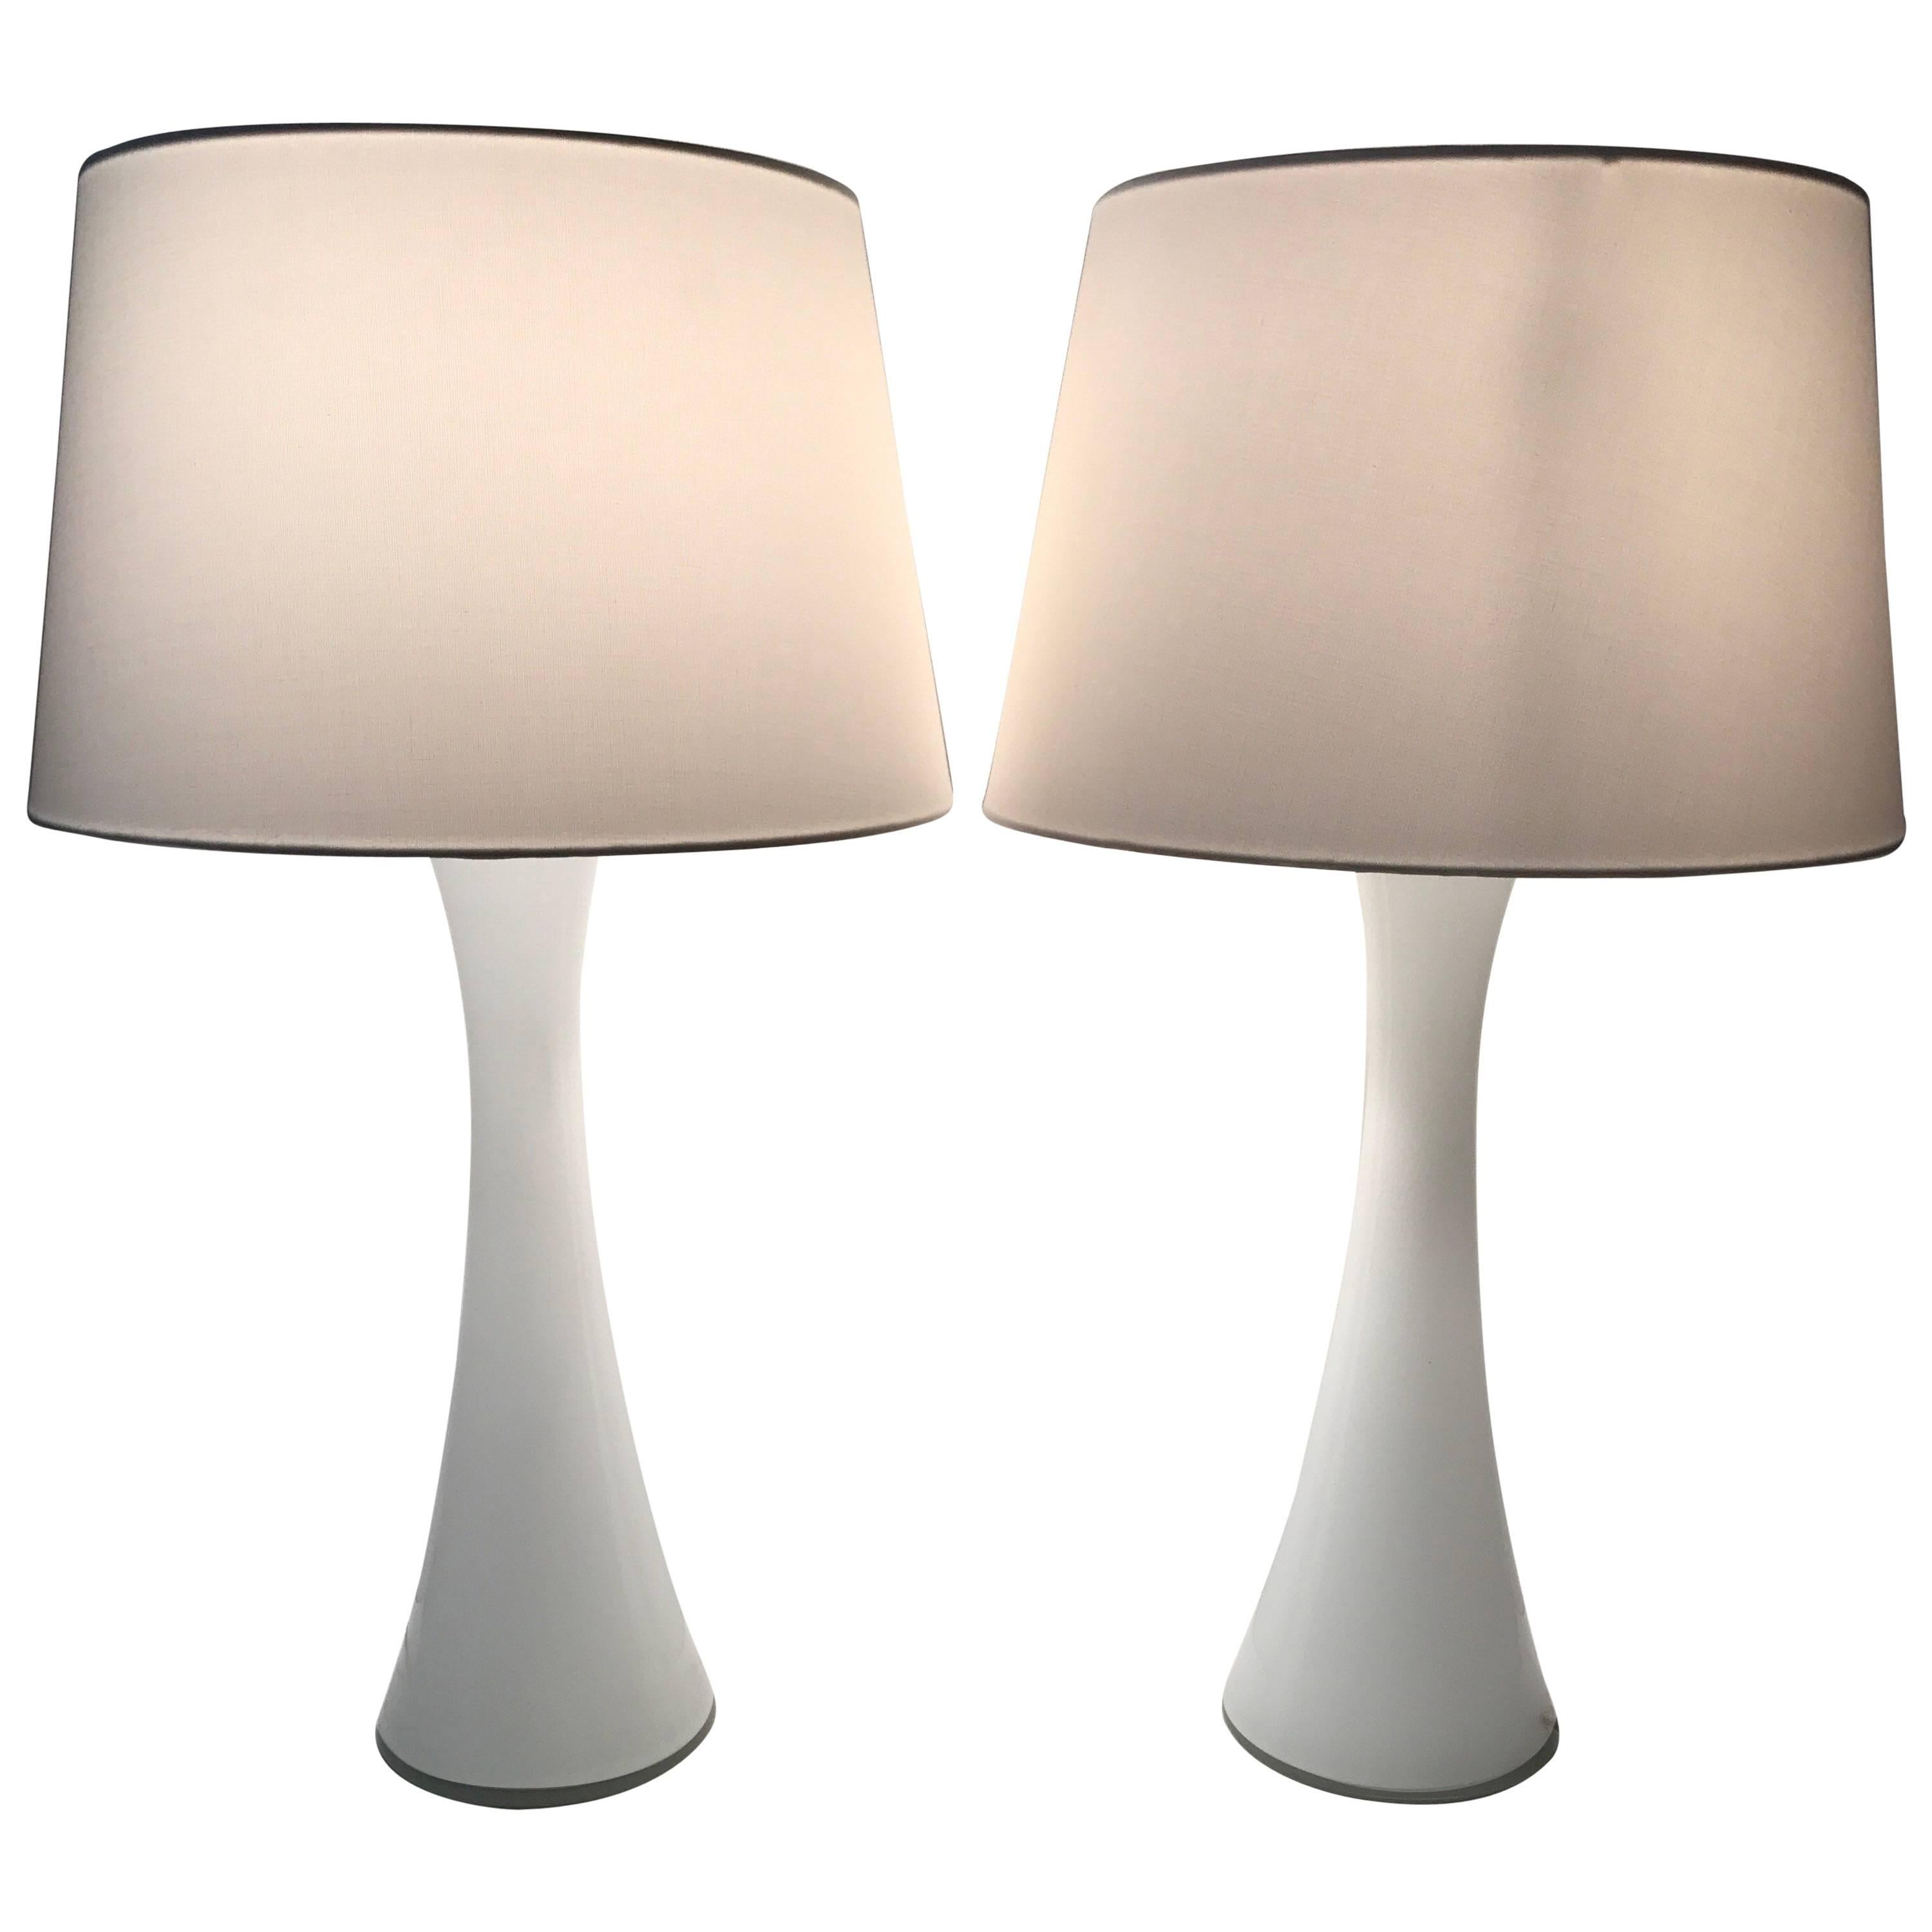 Pair of Swedish Glass Table Lamps Designed by Bergboms and Made by Holmegaard For Sale